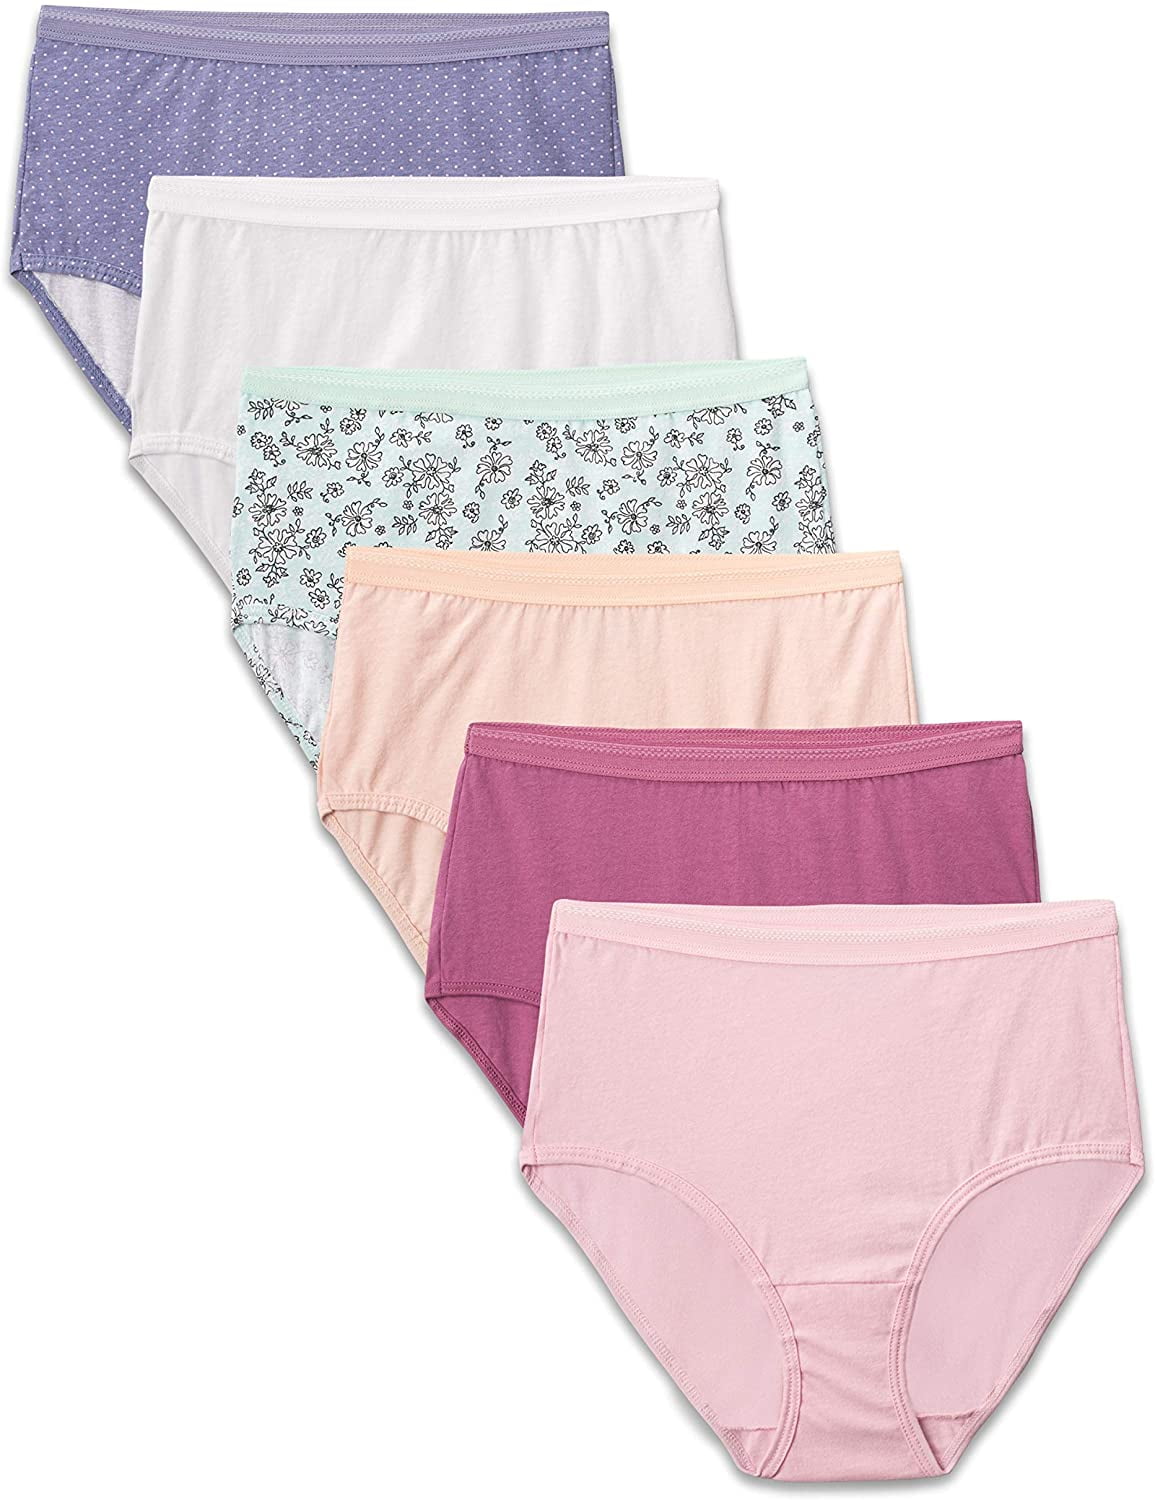 Fruit of the Loom Women`s 6pk Assorted Cotton Briefs, 7, Assorted ...